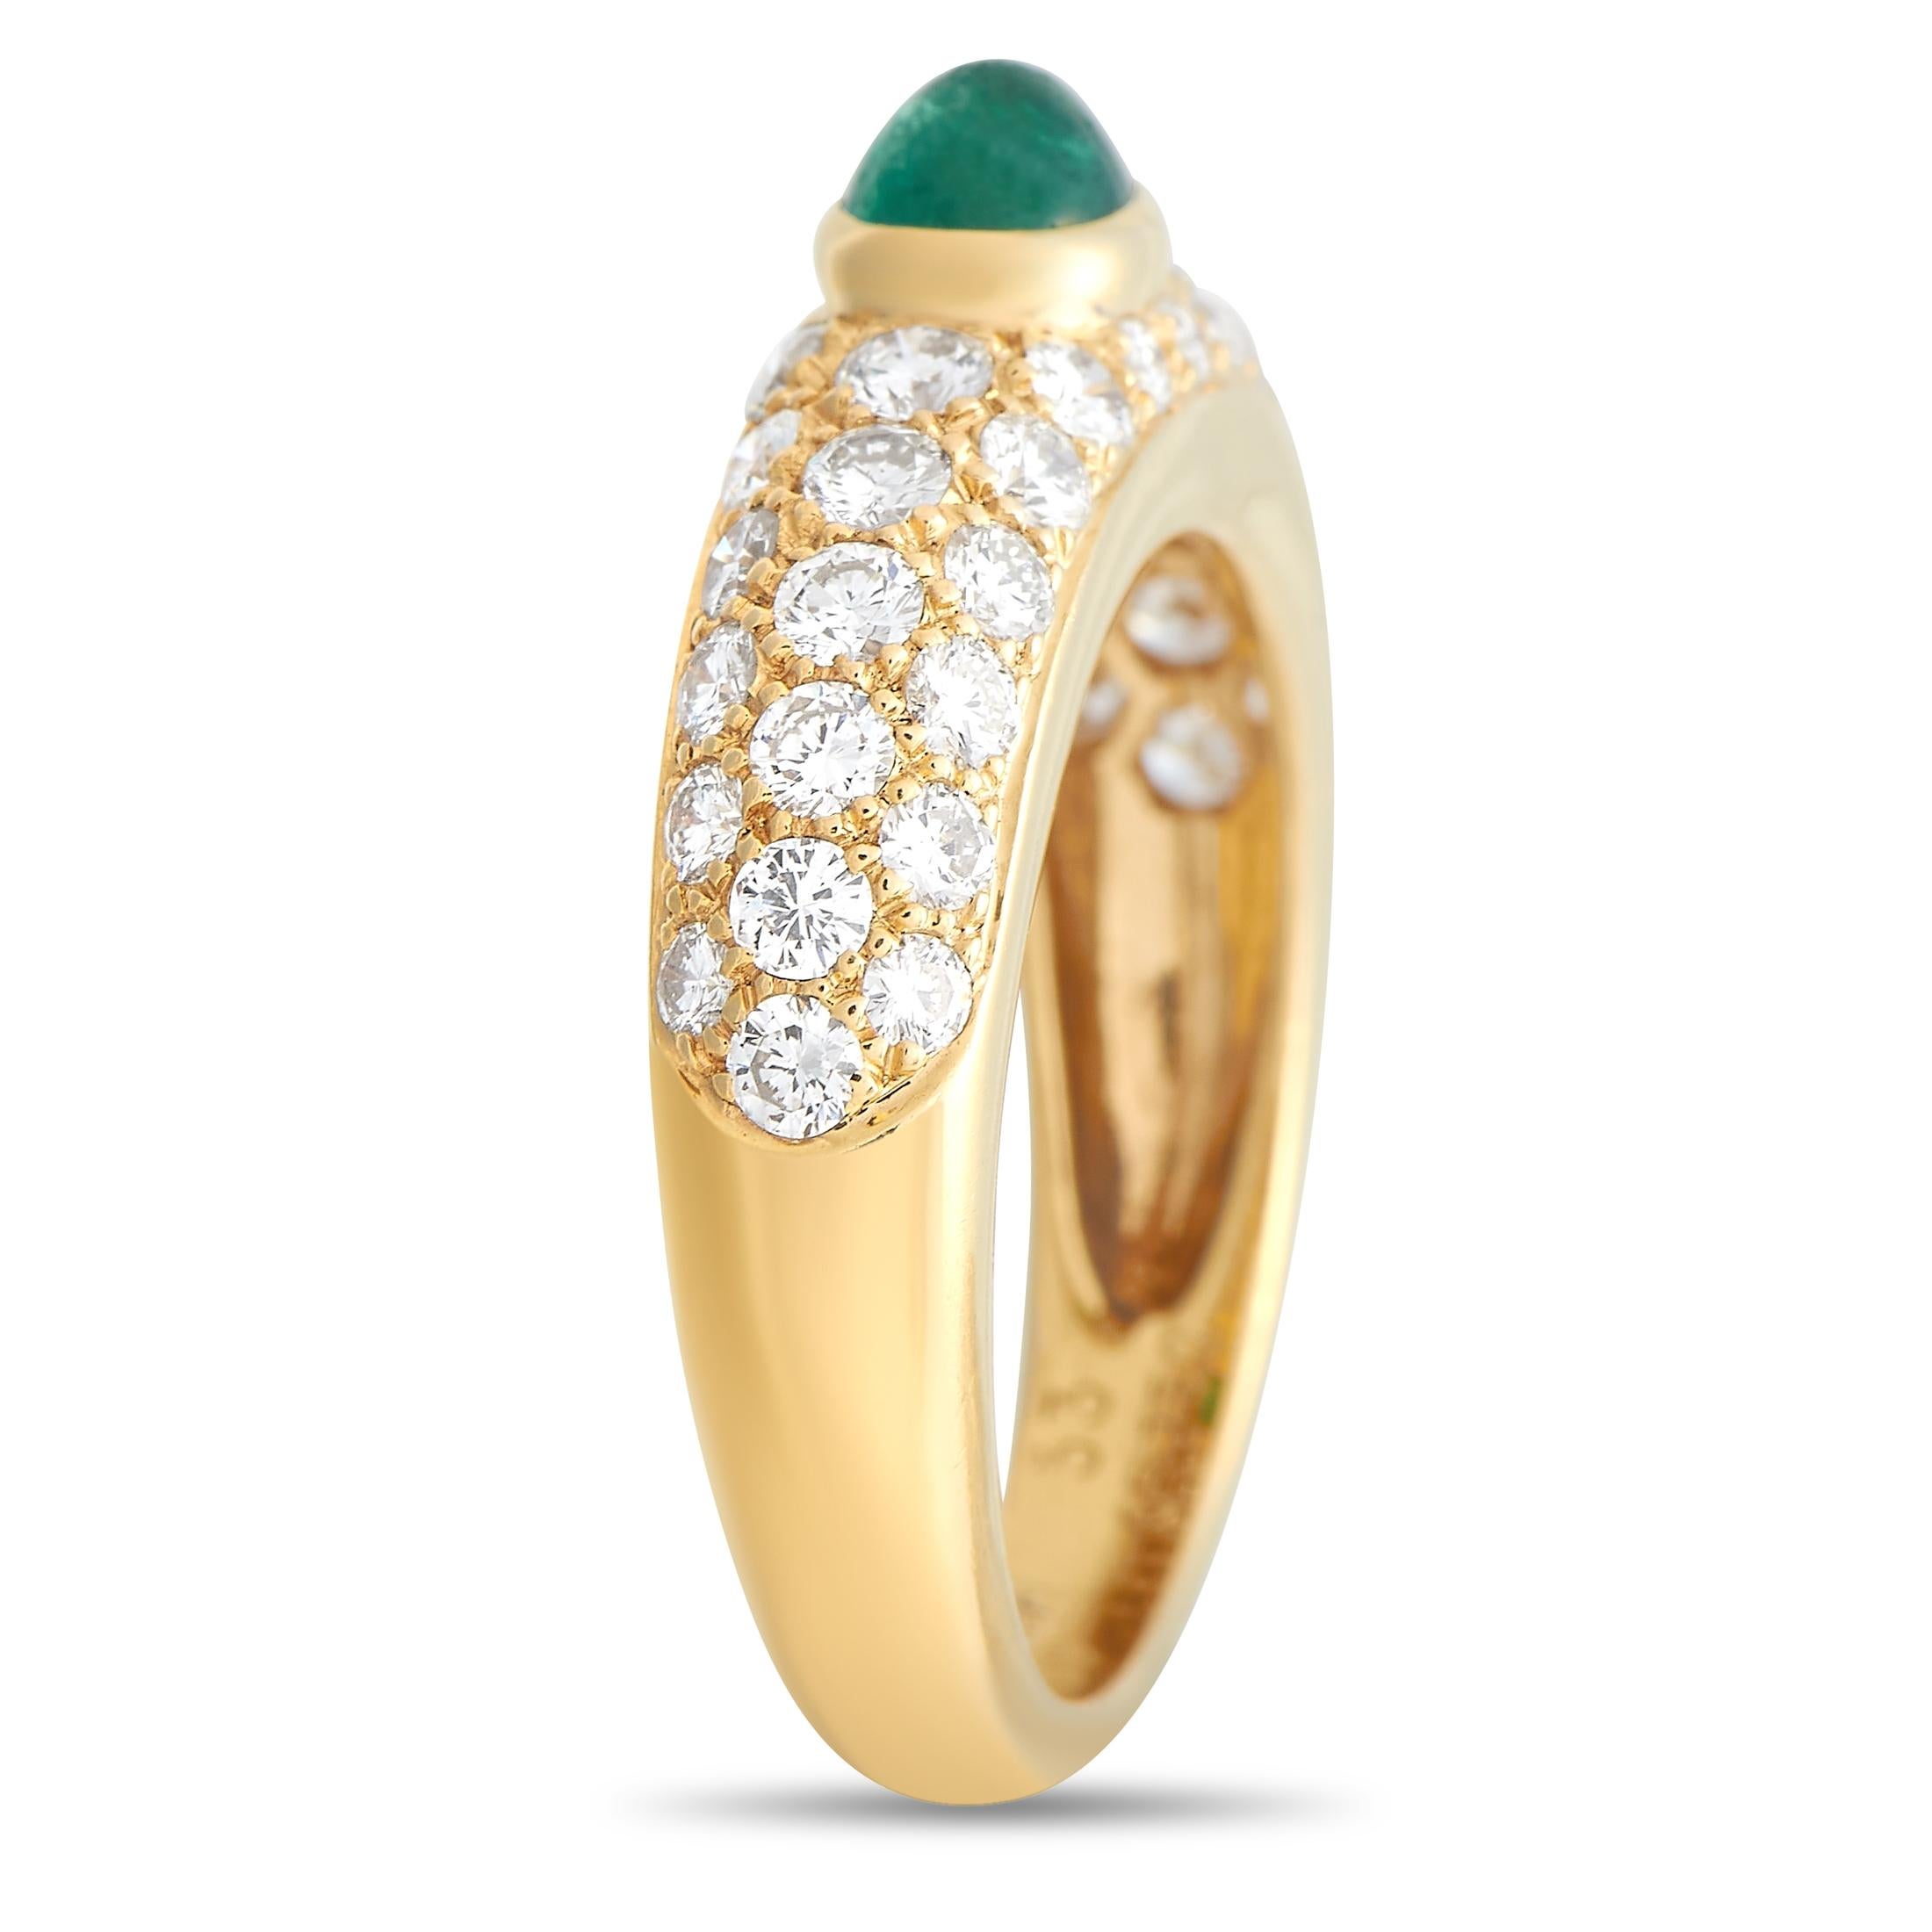 This stunning Cartier 18K Yellow Gold 1.00 ct Diamond Emerald Ring is a must-have! The ring is made with warm 18K Yellow Gold and set with 1.00 carat of small round-cut diamonds of F color and VS Clarity over the front half of the ring. A beautiful